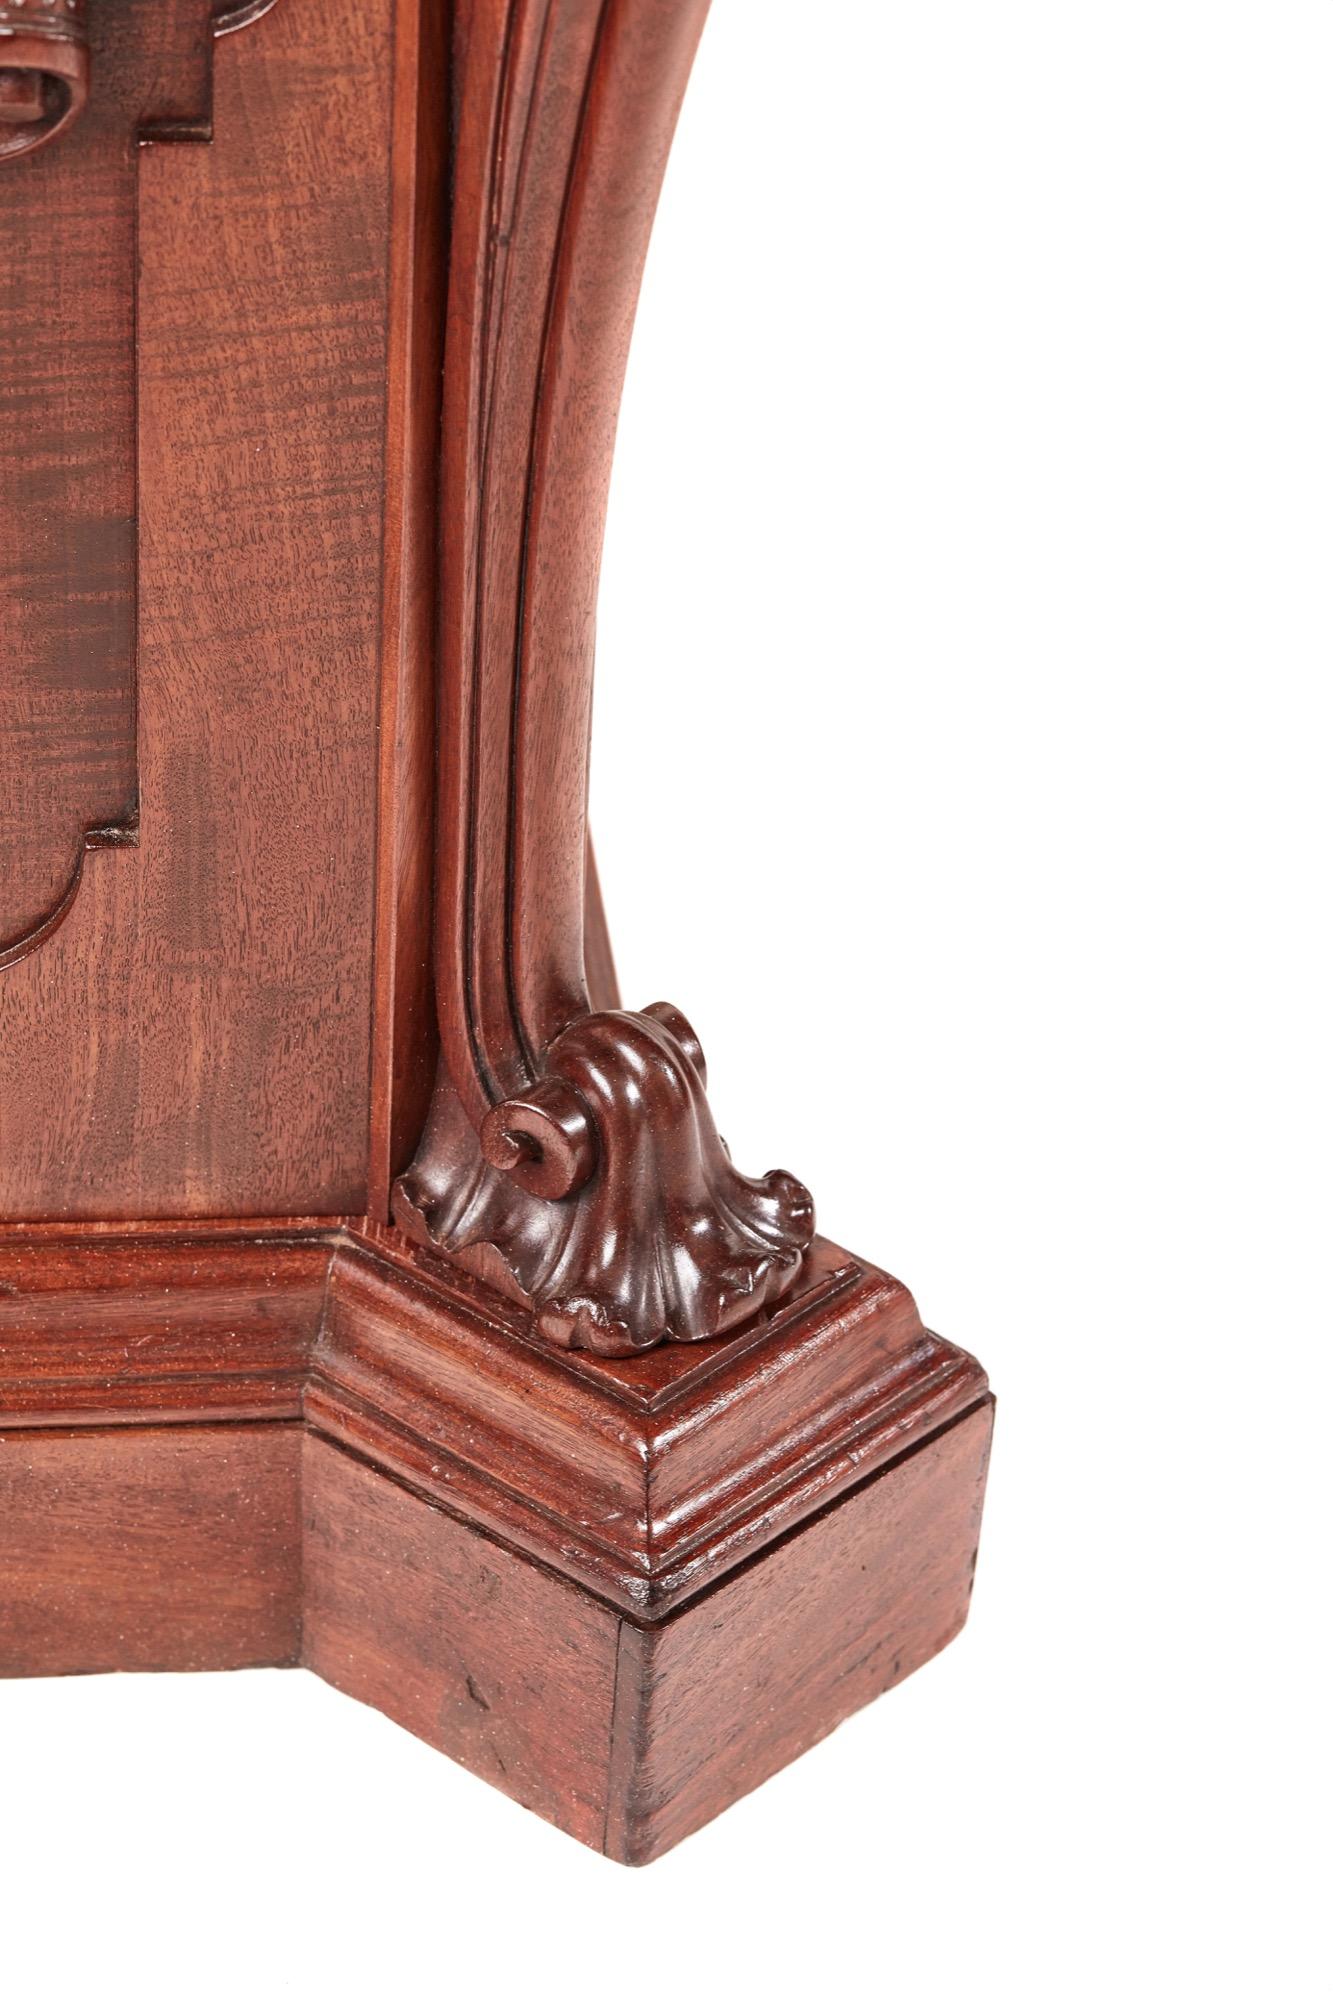 Hand-Carved Magnificent Quality Antique William IV Carved Mahogany Sideboard For Sale